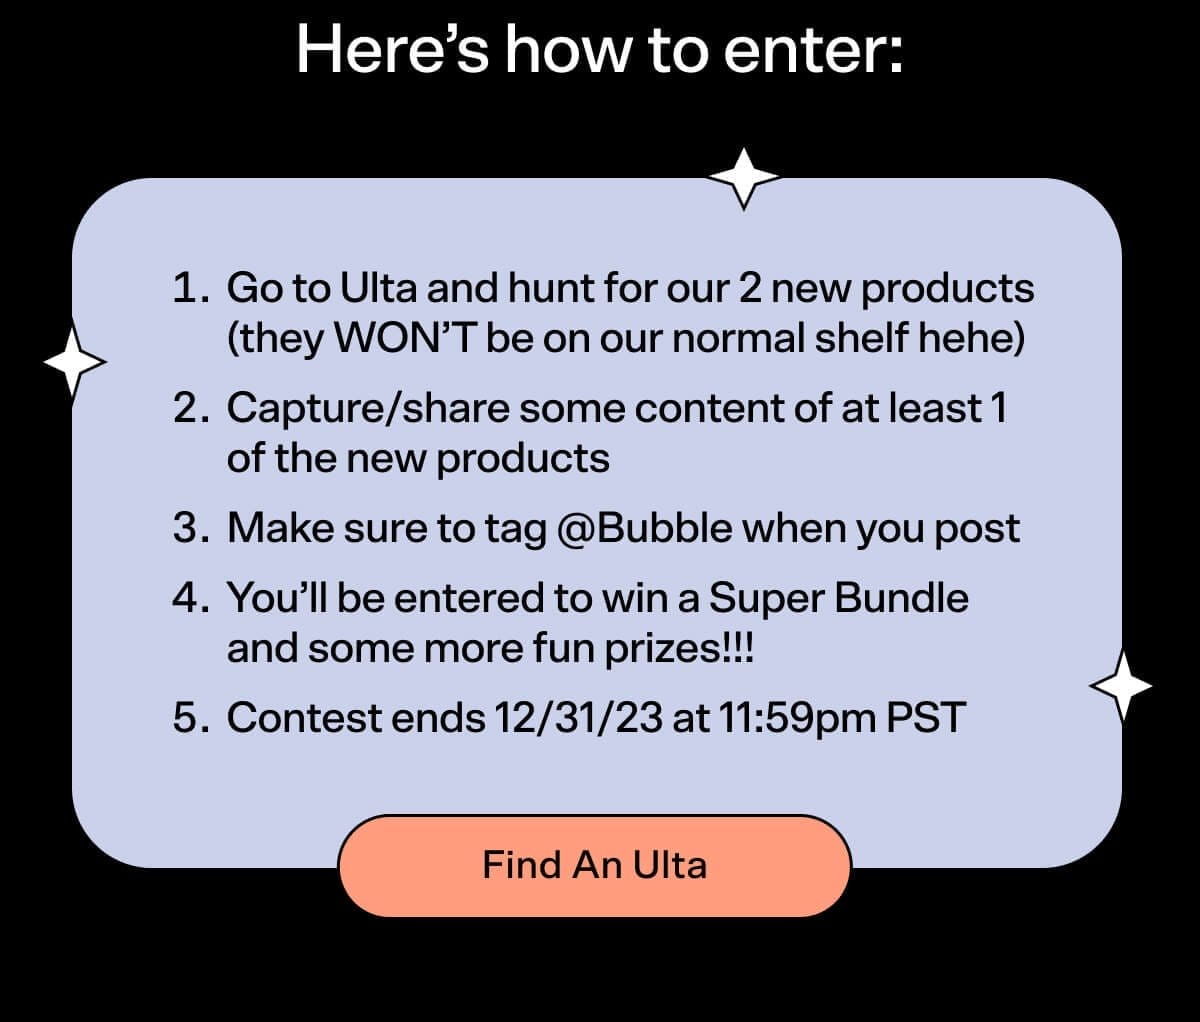 Here's how to enter: 1. Go to Ulta and hunt for our 2 new products (they WON’T be on our normal shelf hehe) 2. Capture/share some content of at least 1 of the new products 3. Make sure to tag @Bubble when you post 4. You’ll be entered to win a Super Bundle and some more fun prizes!!! 5. Contest ends 12/31/23 at 11:59pm PST